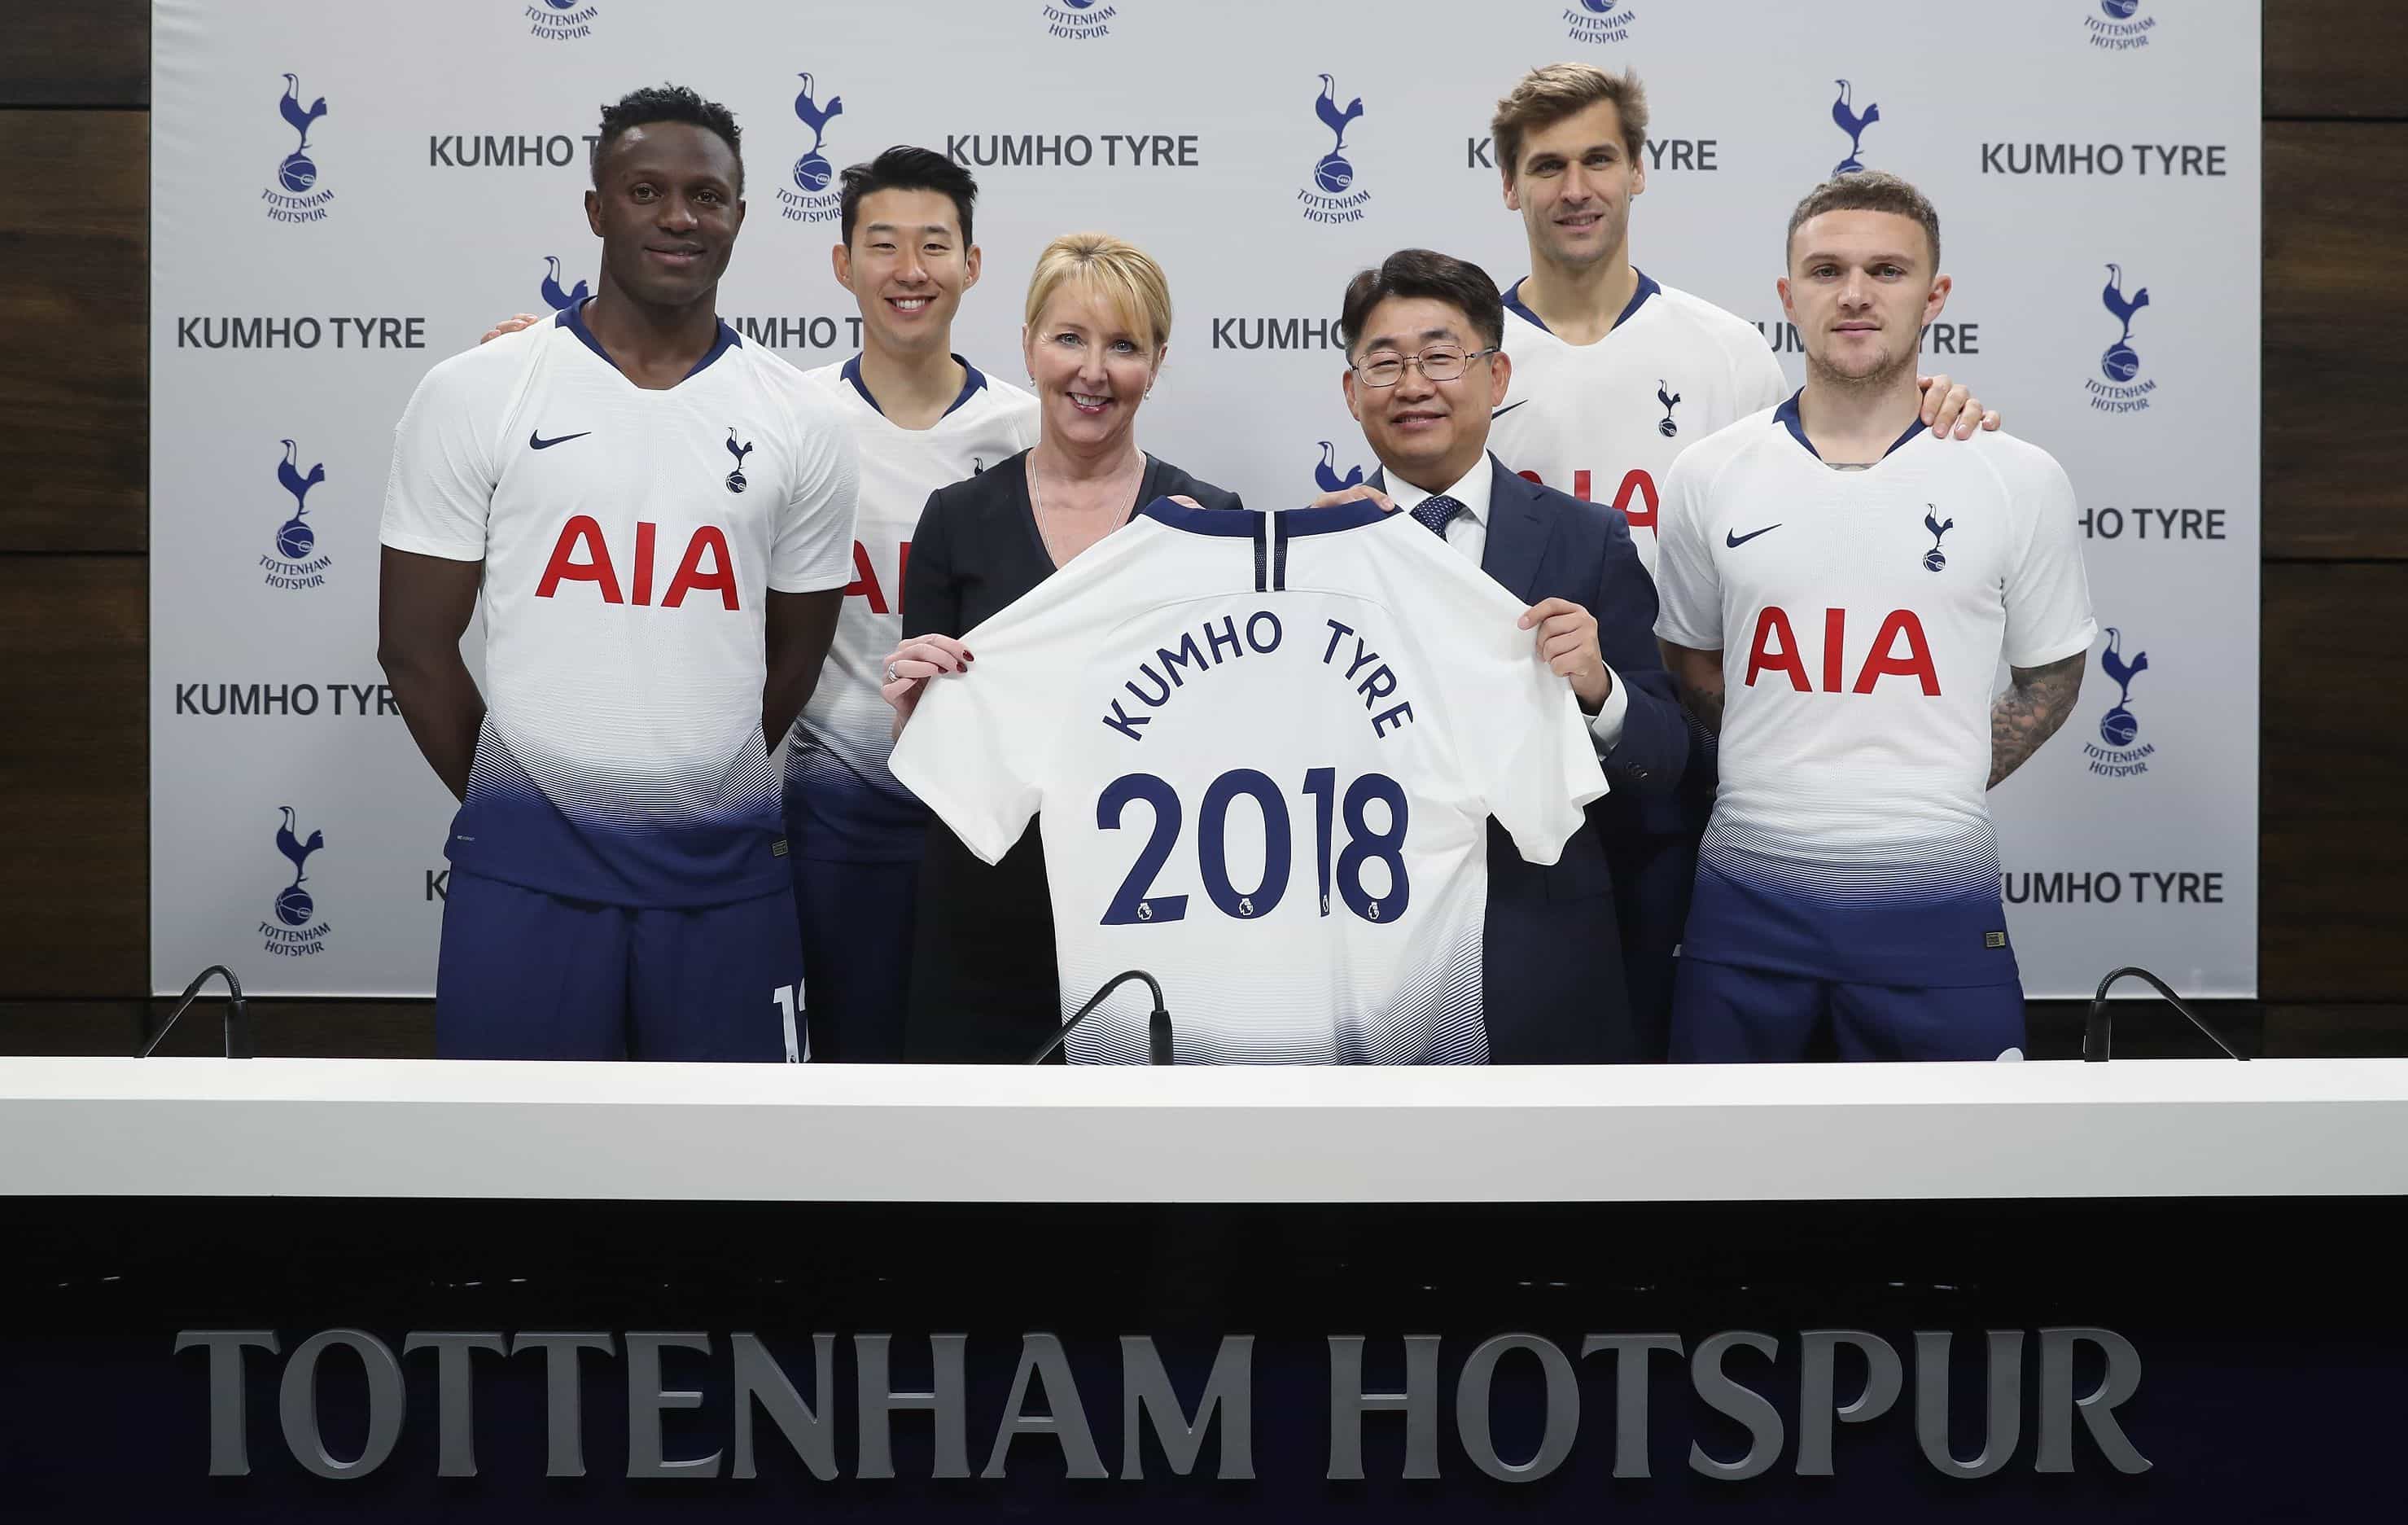 Tottenham to Wear Special Charity Sponsor Vs Manchester United